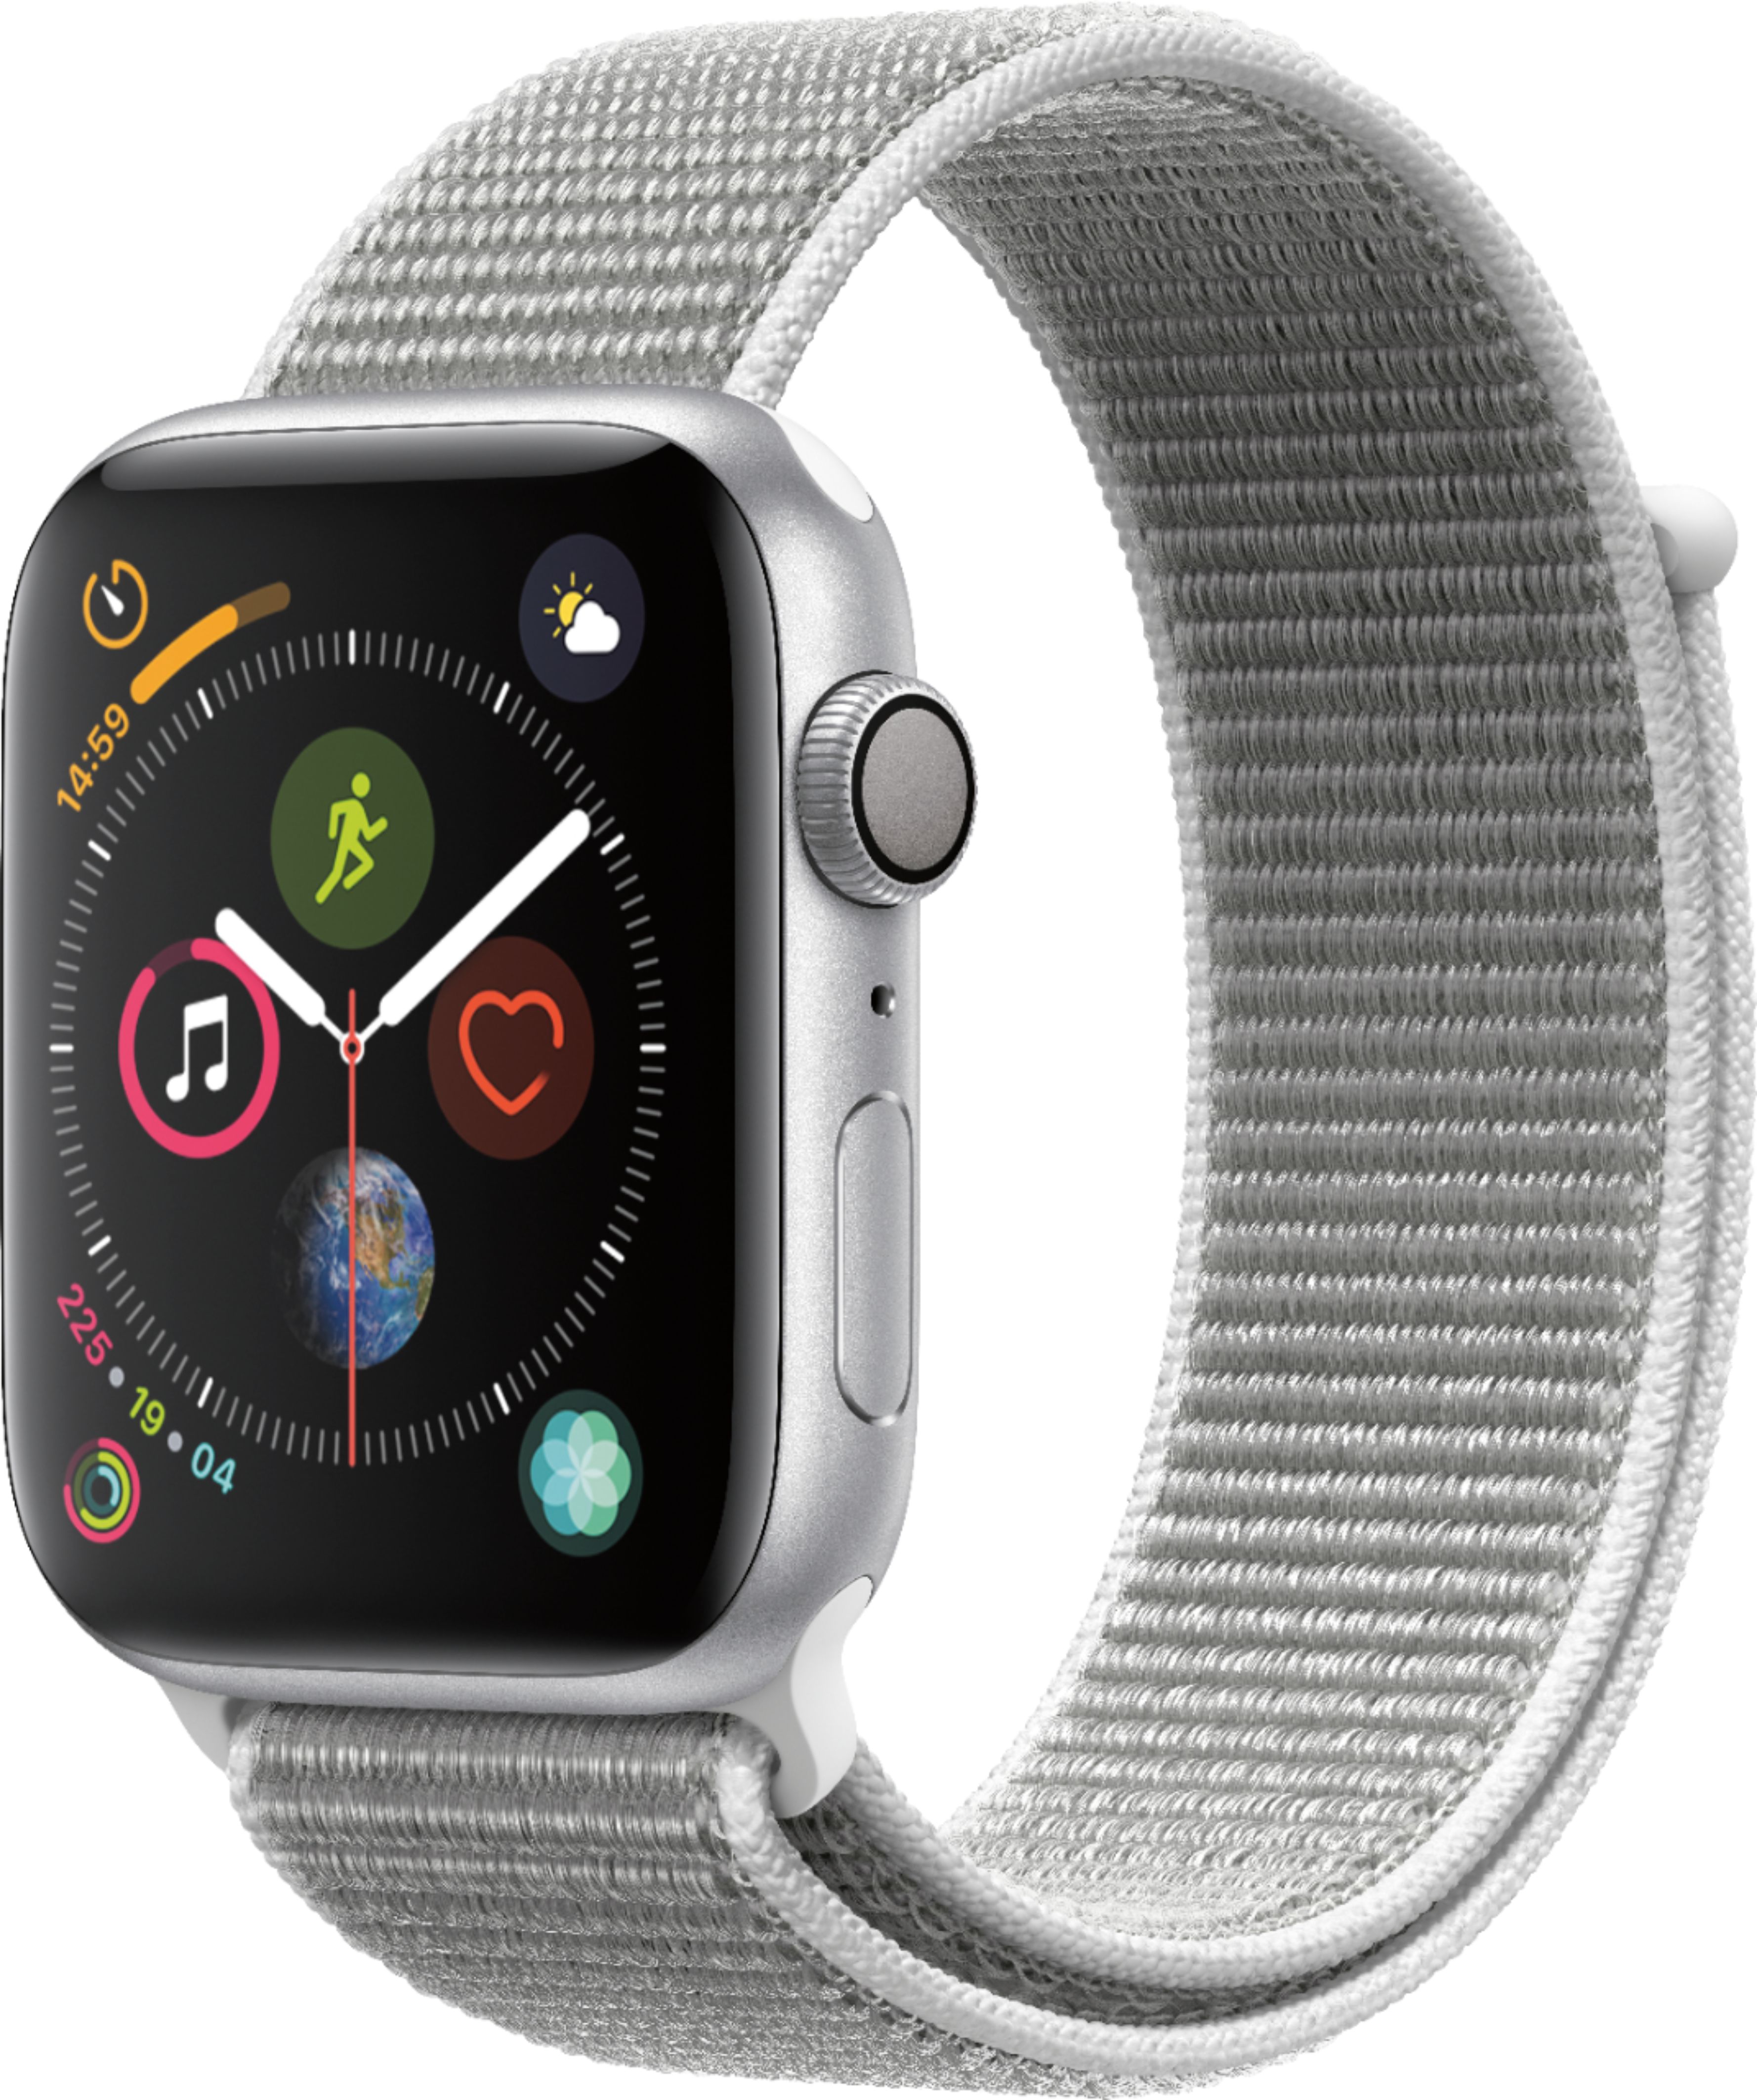 Left View: Apple Watch SE (GPS + Cellular) 40mm Space Gray Aluminum Case with Tornado/Gray Sport Loop - Space Gray (AT&T)